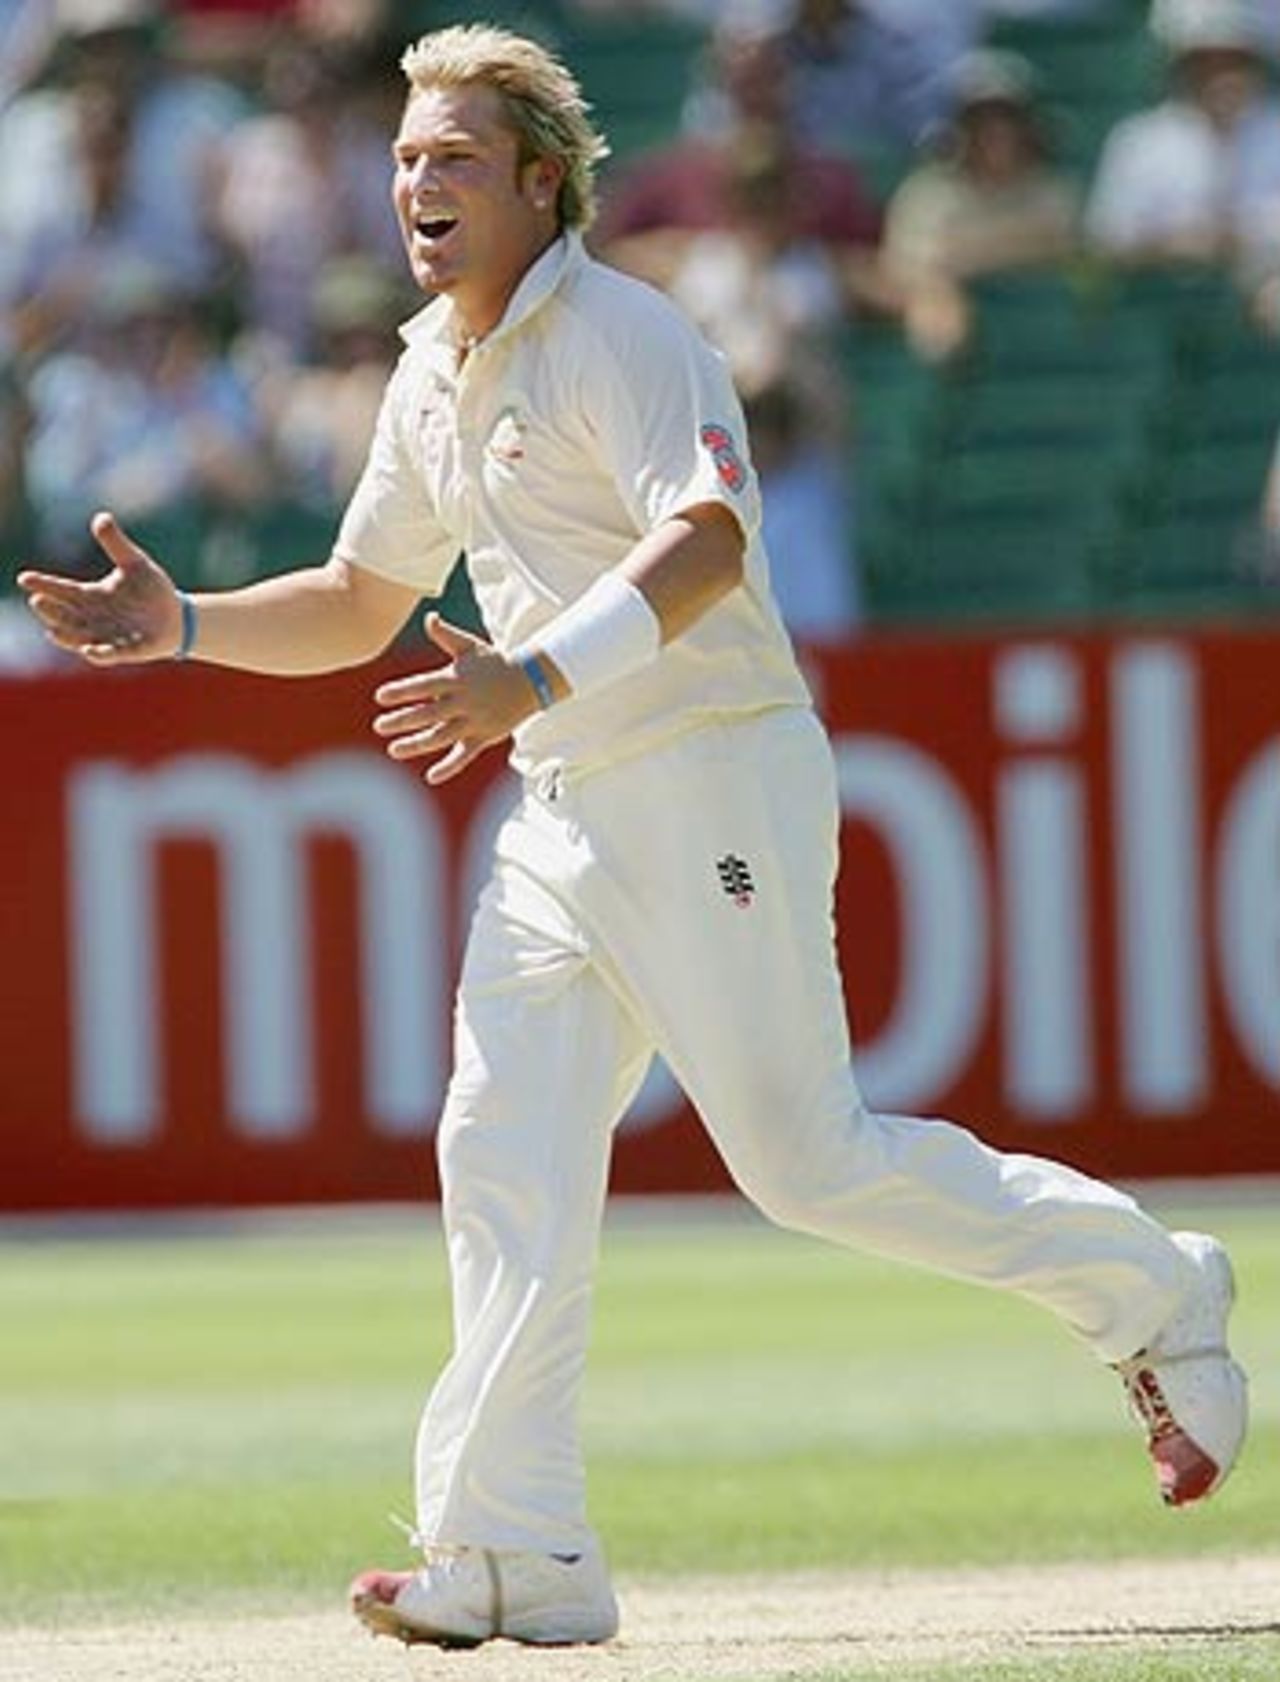 Shane Warne took three early wickets to stifle South Africa, Australia v South Africa, 2nd Test, Melbourne, 4th day, December 29, 2005